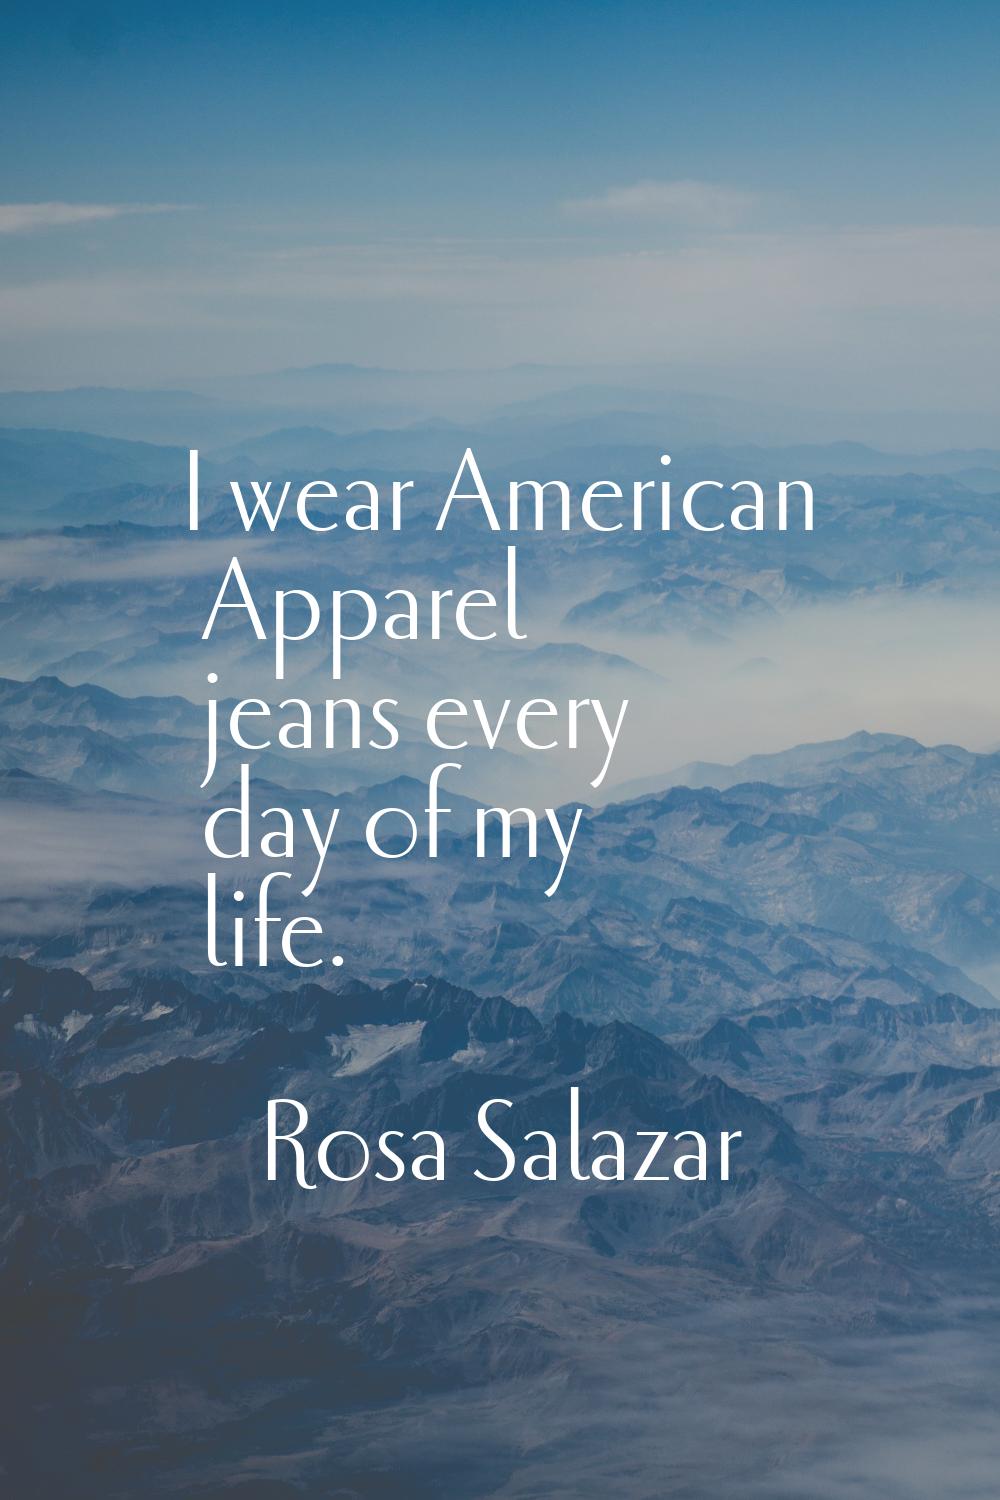 I wear American Apparel jeans every day of my life.